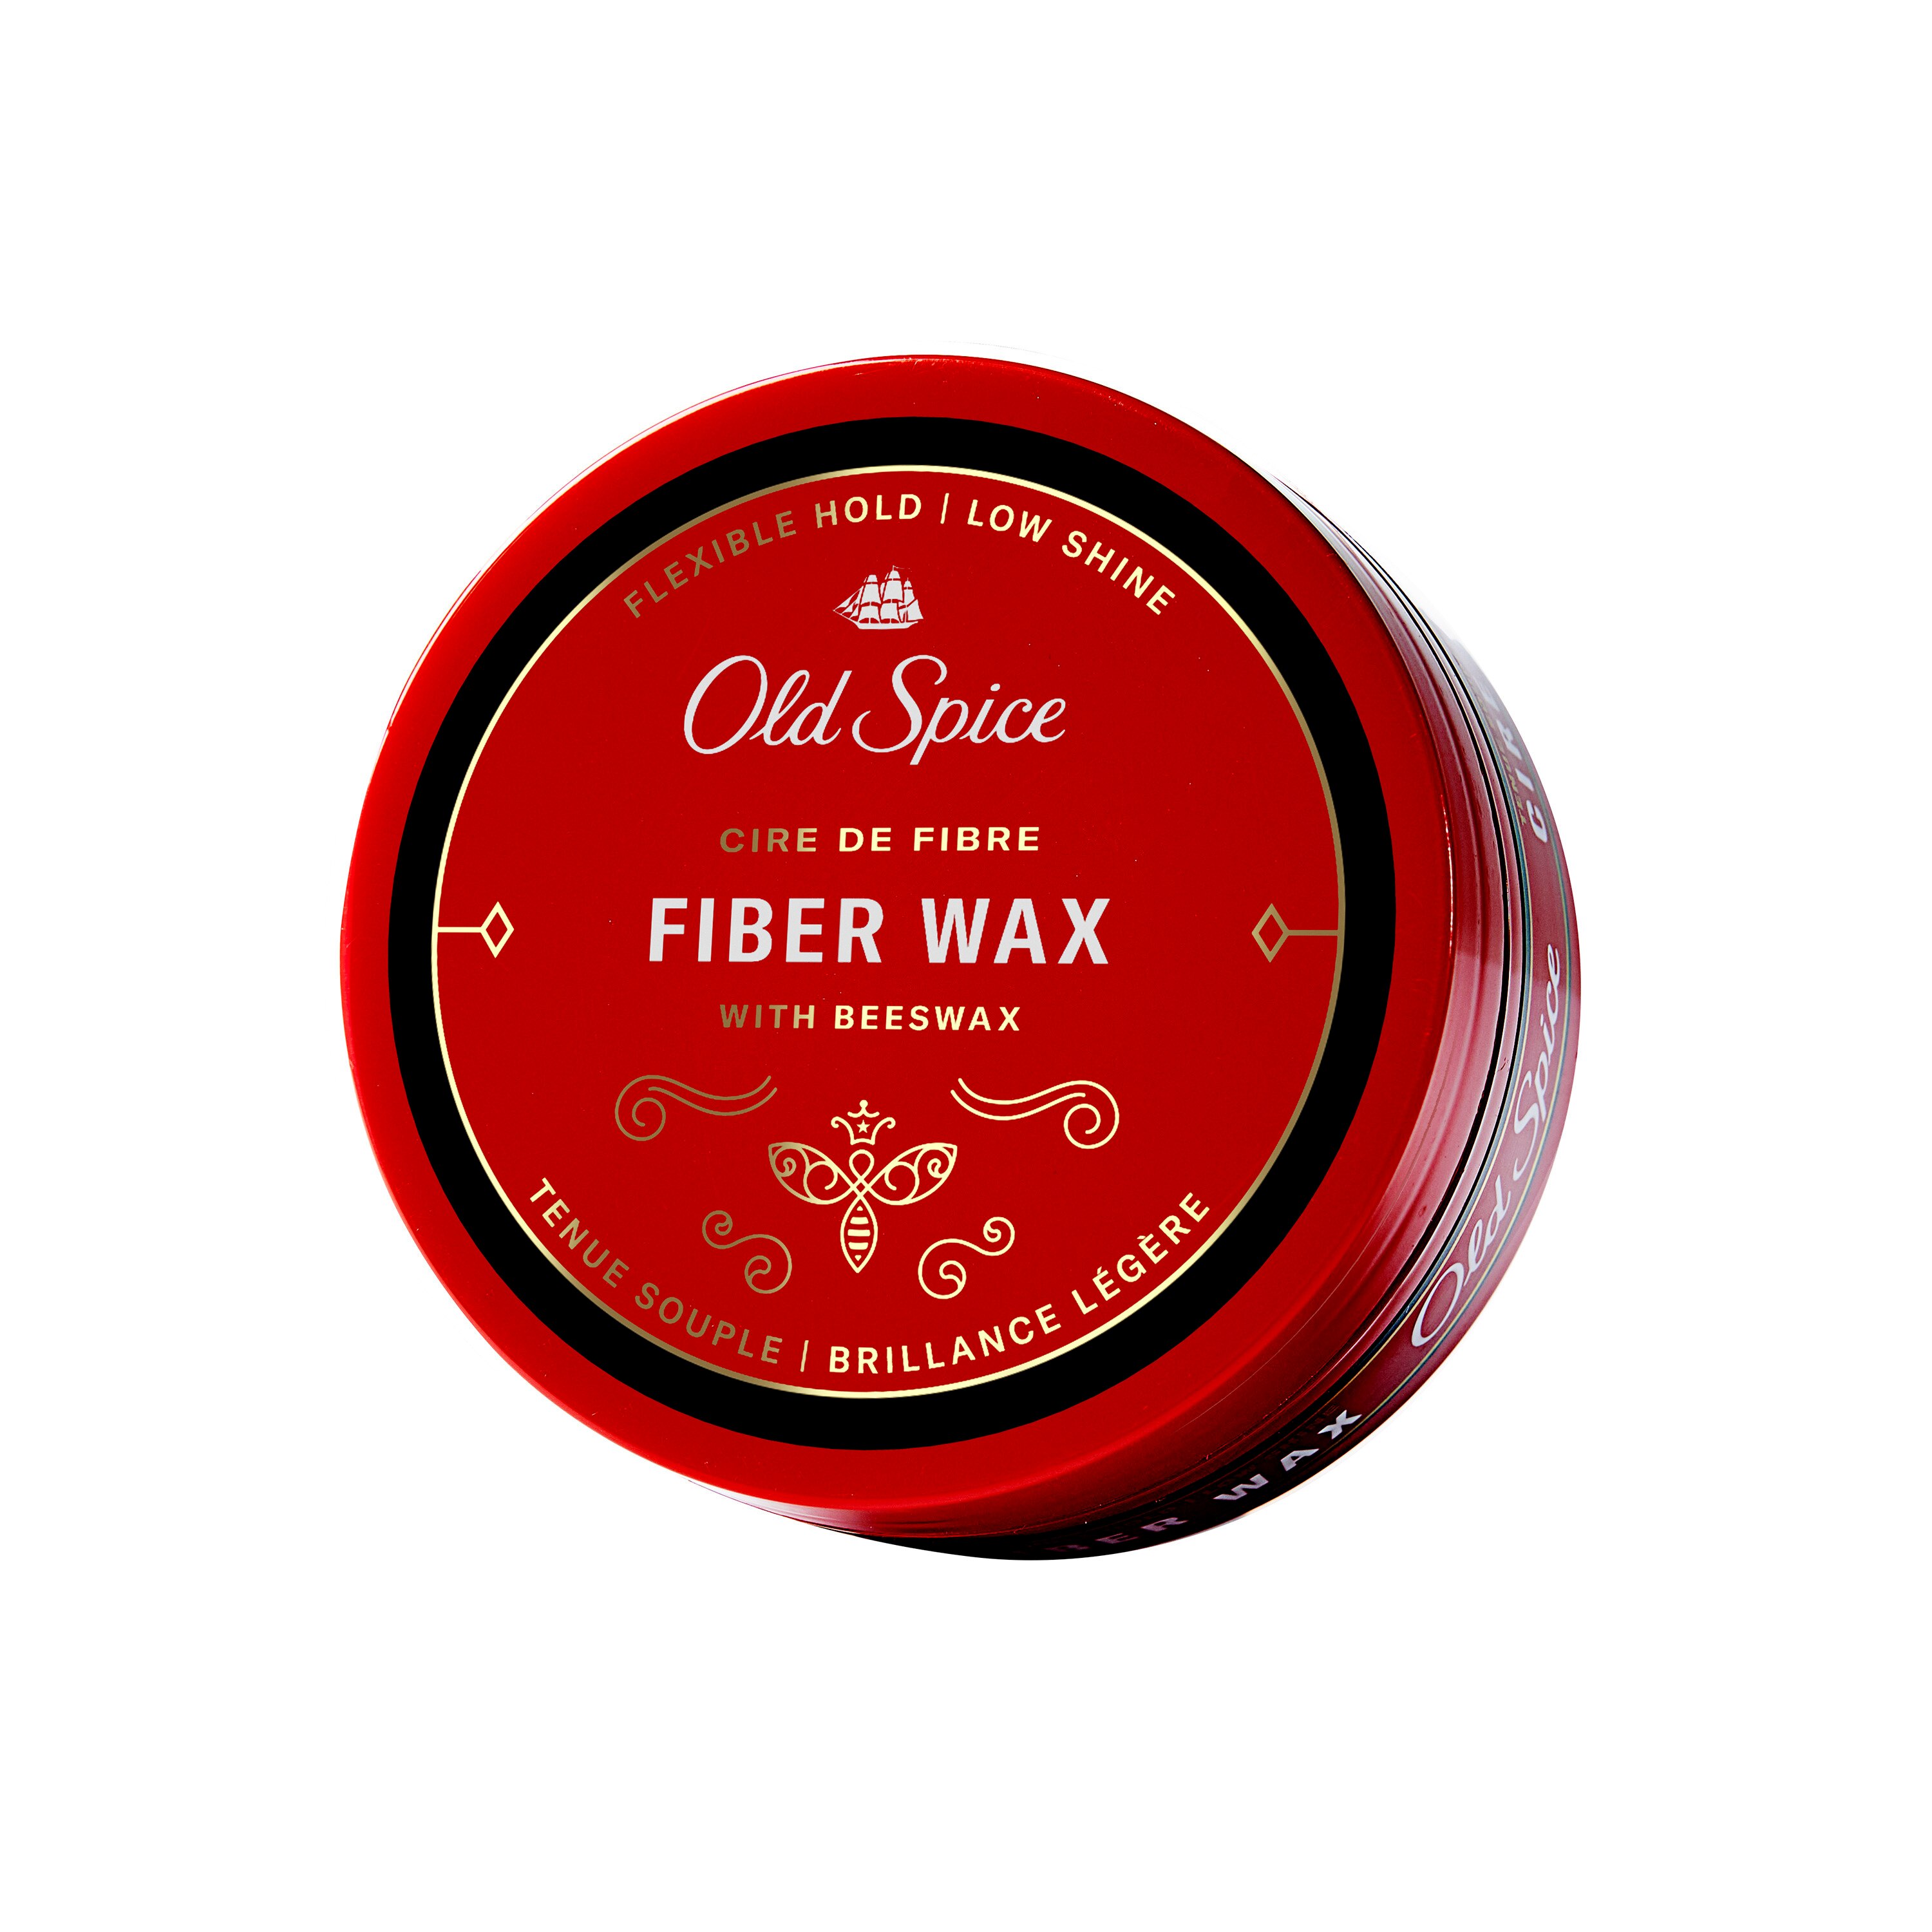 Old Spice Hair Styling Fiber Wax for Men, 2.22 OZ